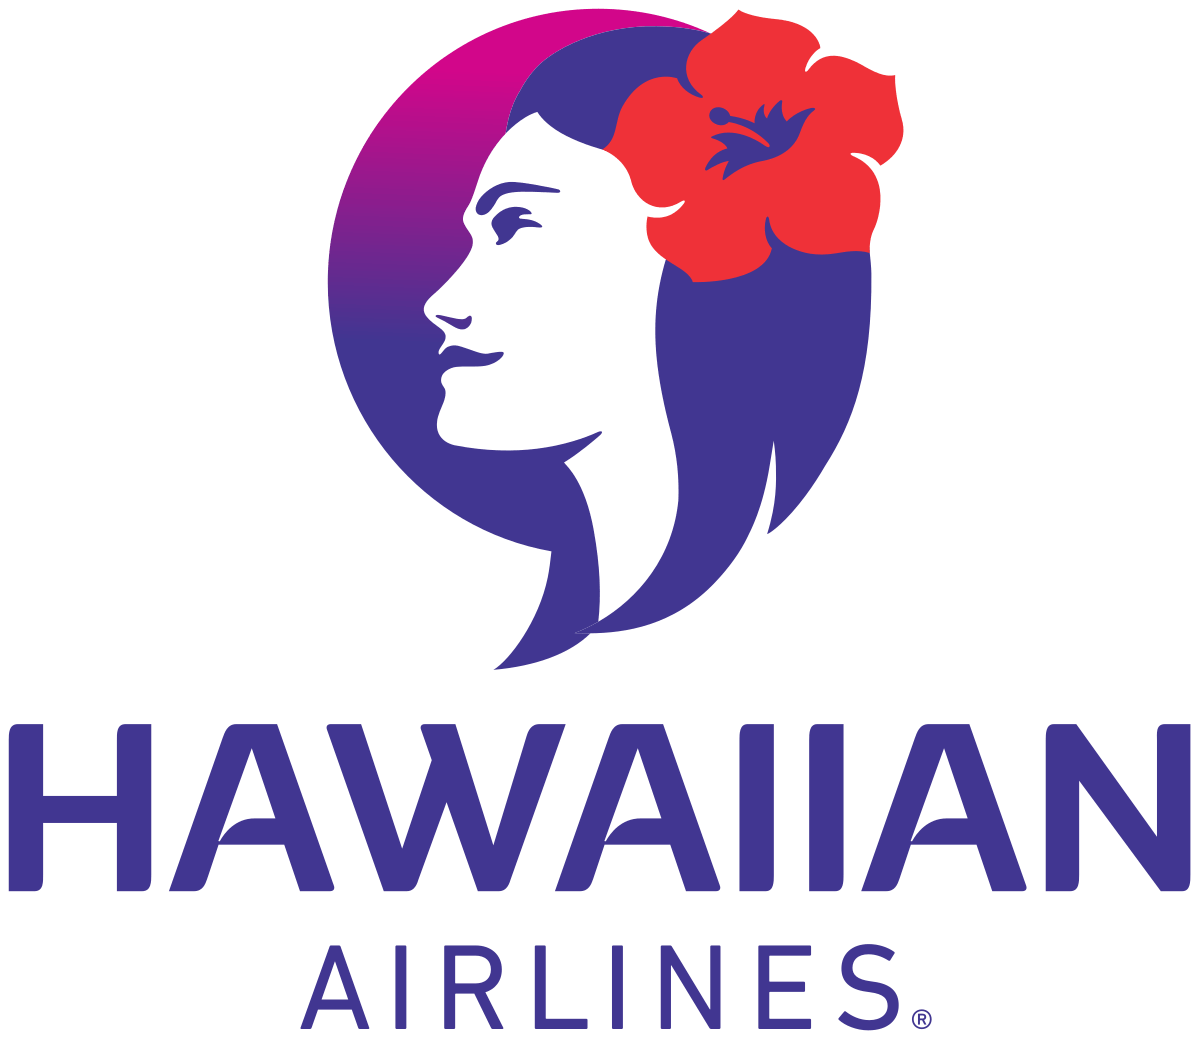 Flag Airline Logo - Hawaiian Airlines